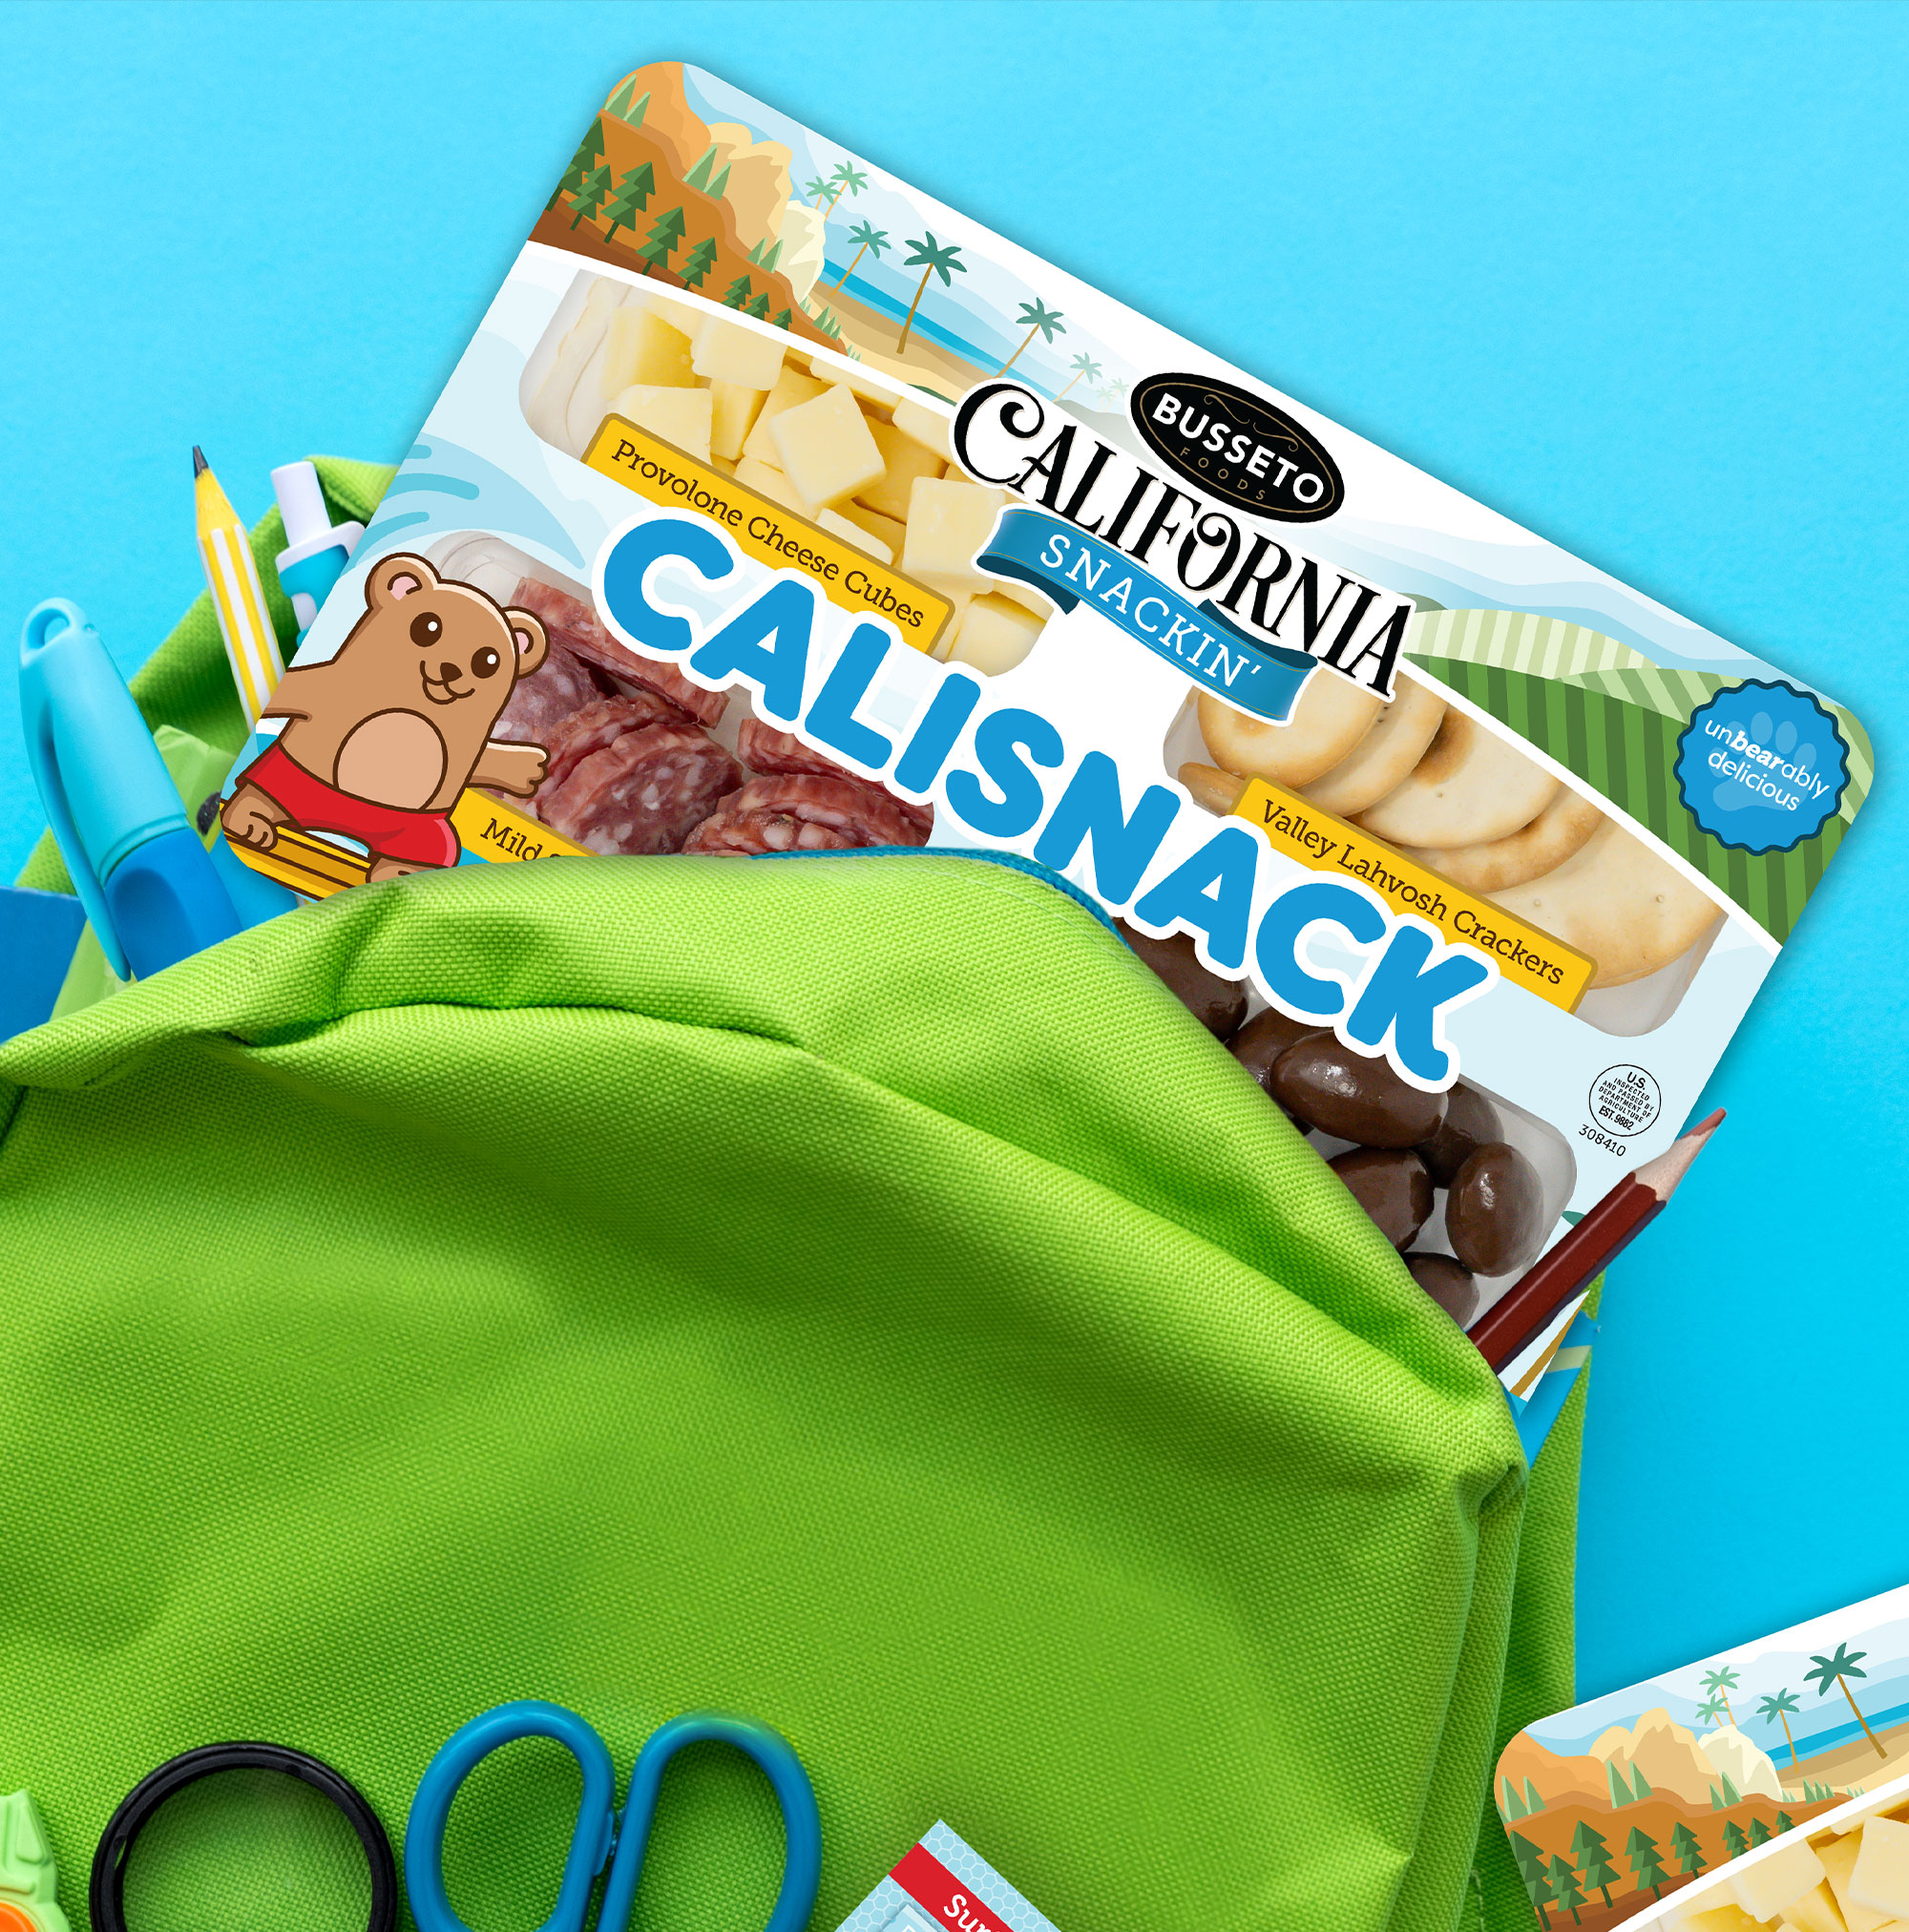 Calisnack Kids by California Snackin' Package Design and Environmental Design Octane Advertising Design